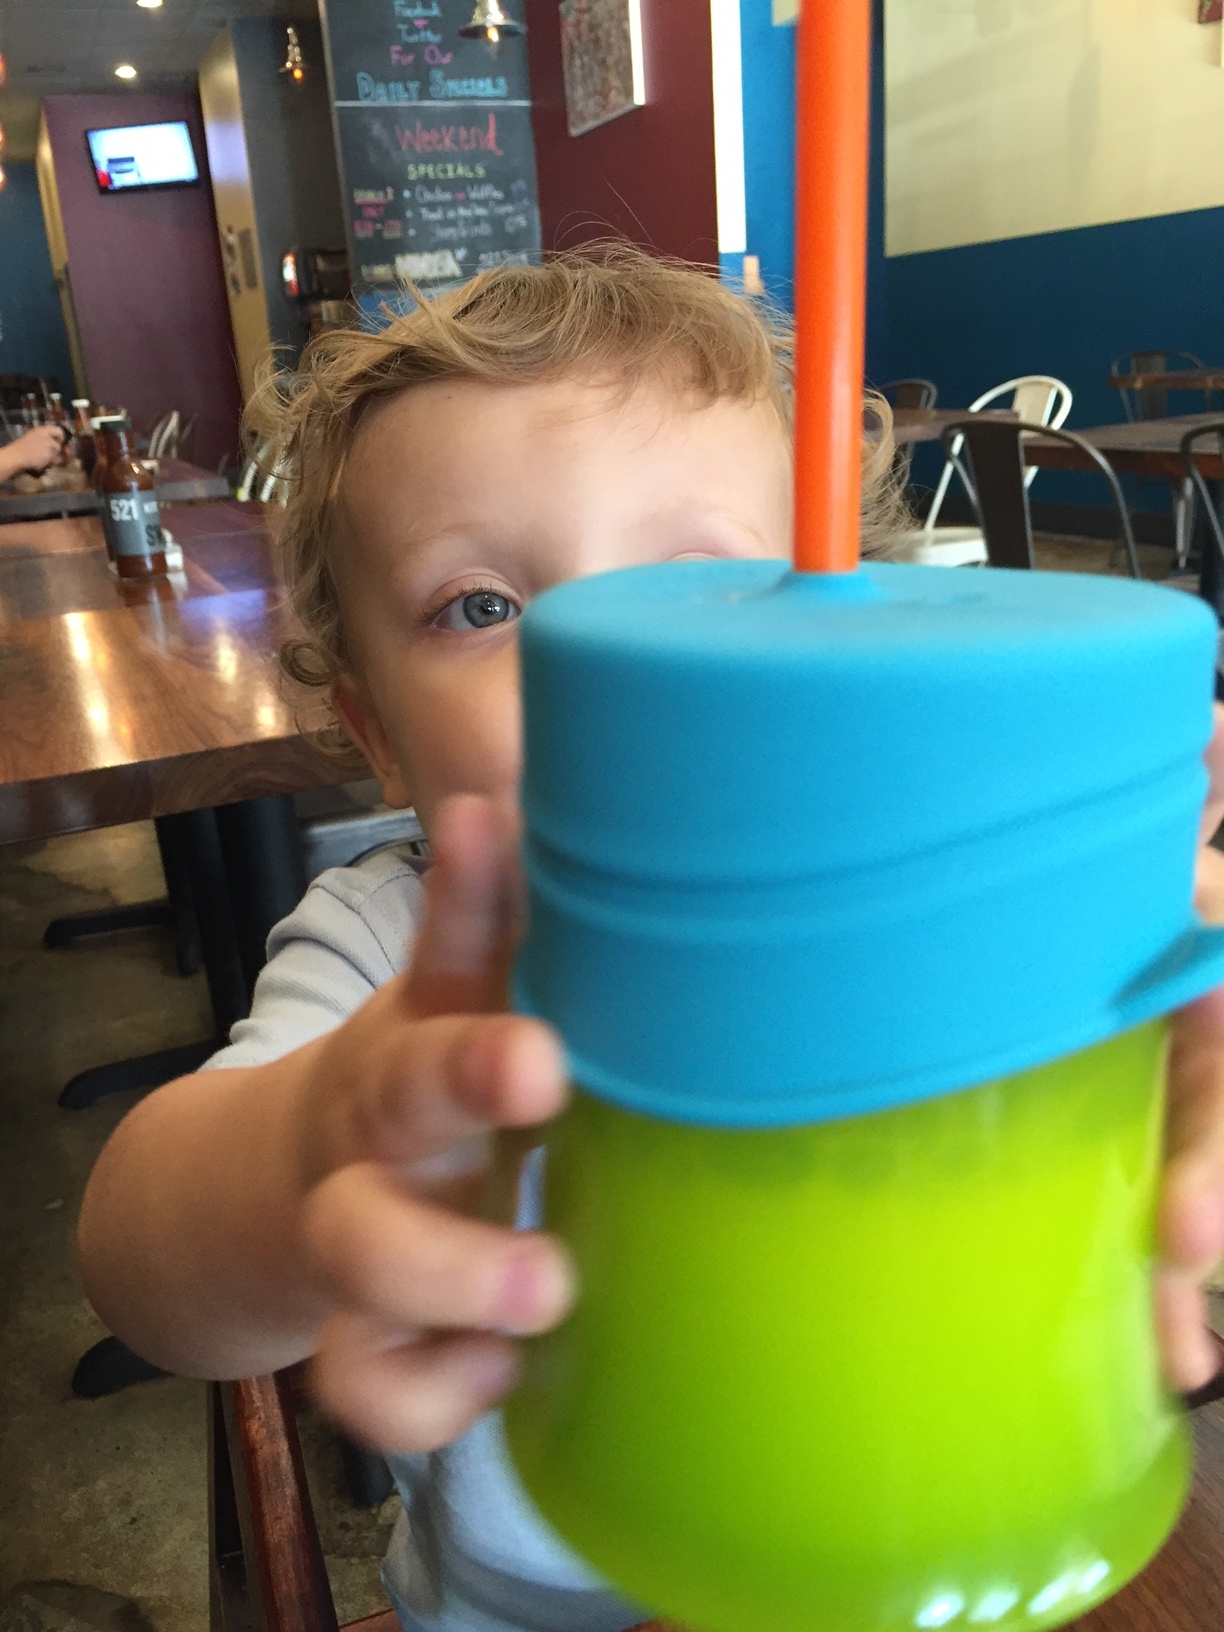 Boon With Straw Sippy Cups